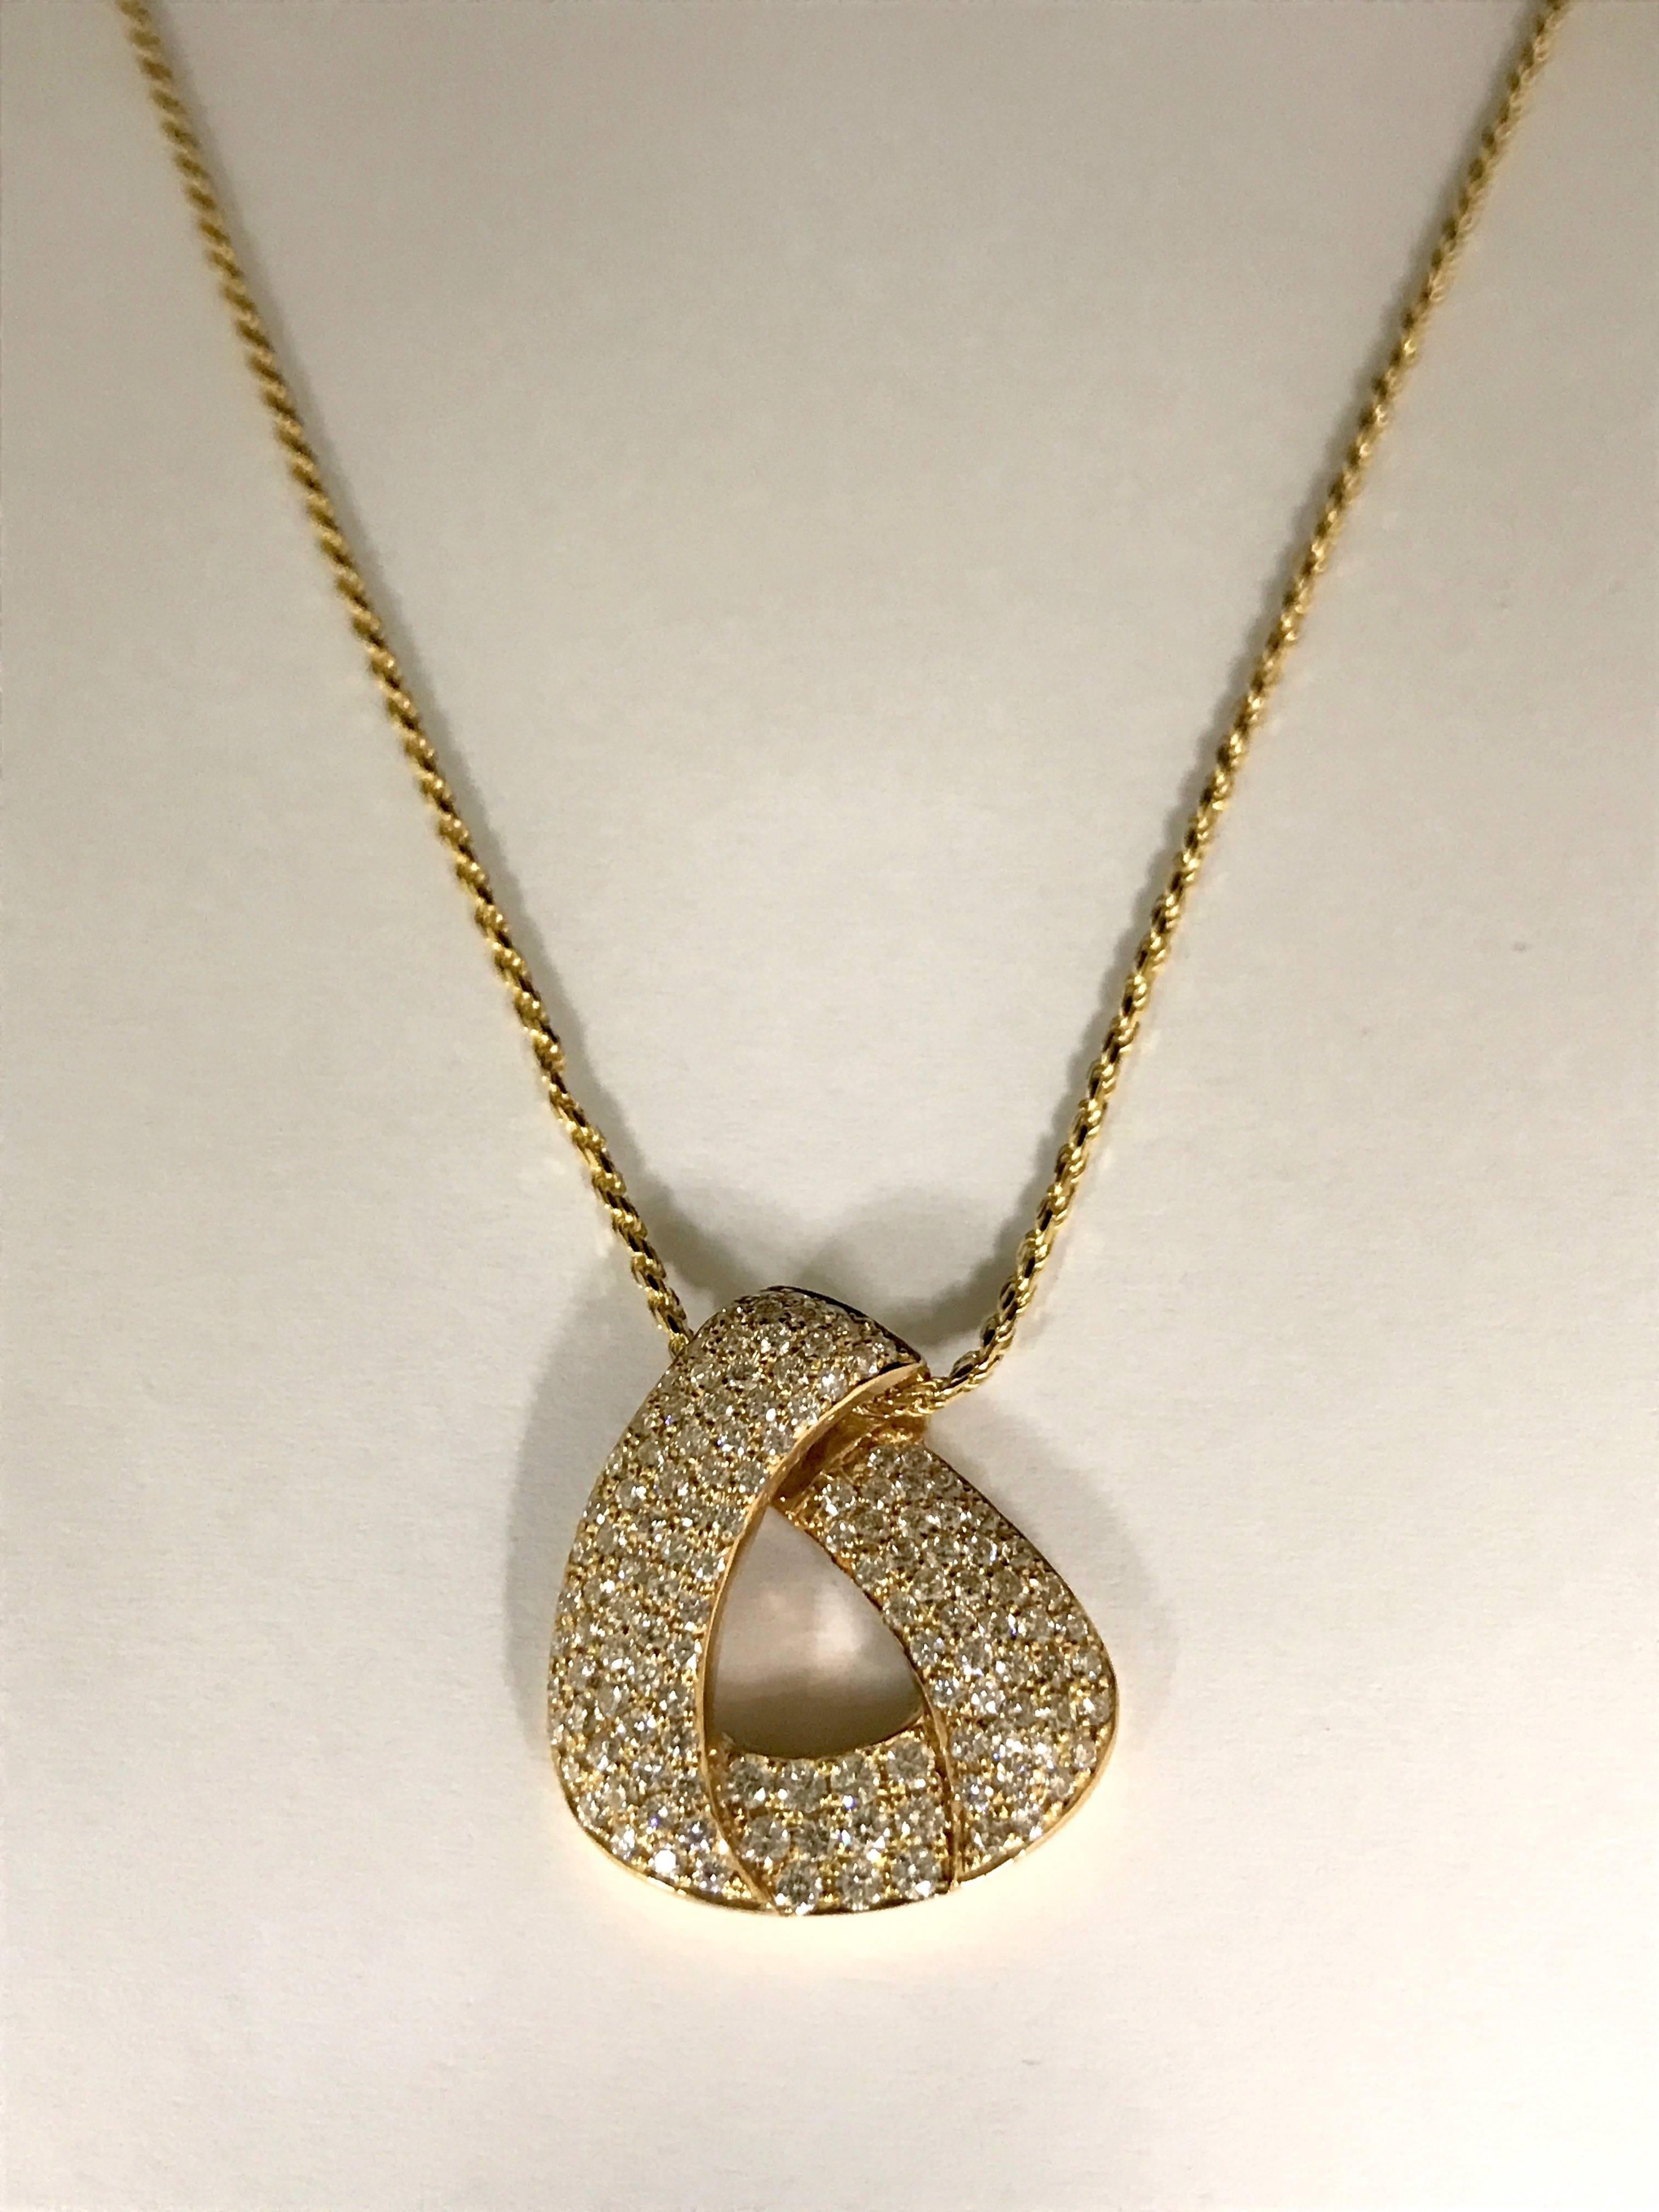 Diamonds and Yellow Gold Pendant Necklace
Yellow Gold 
127 Diamonds 0,960 Carat Form B Purity SI 
Yellow Gold Sliding Rope Chain 
